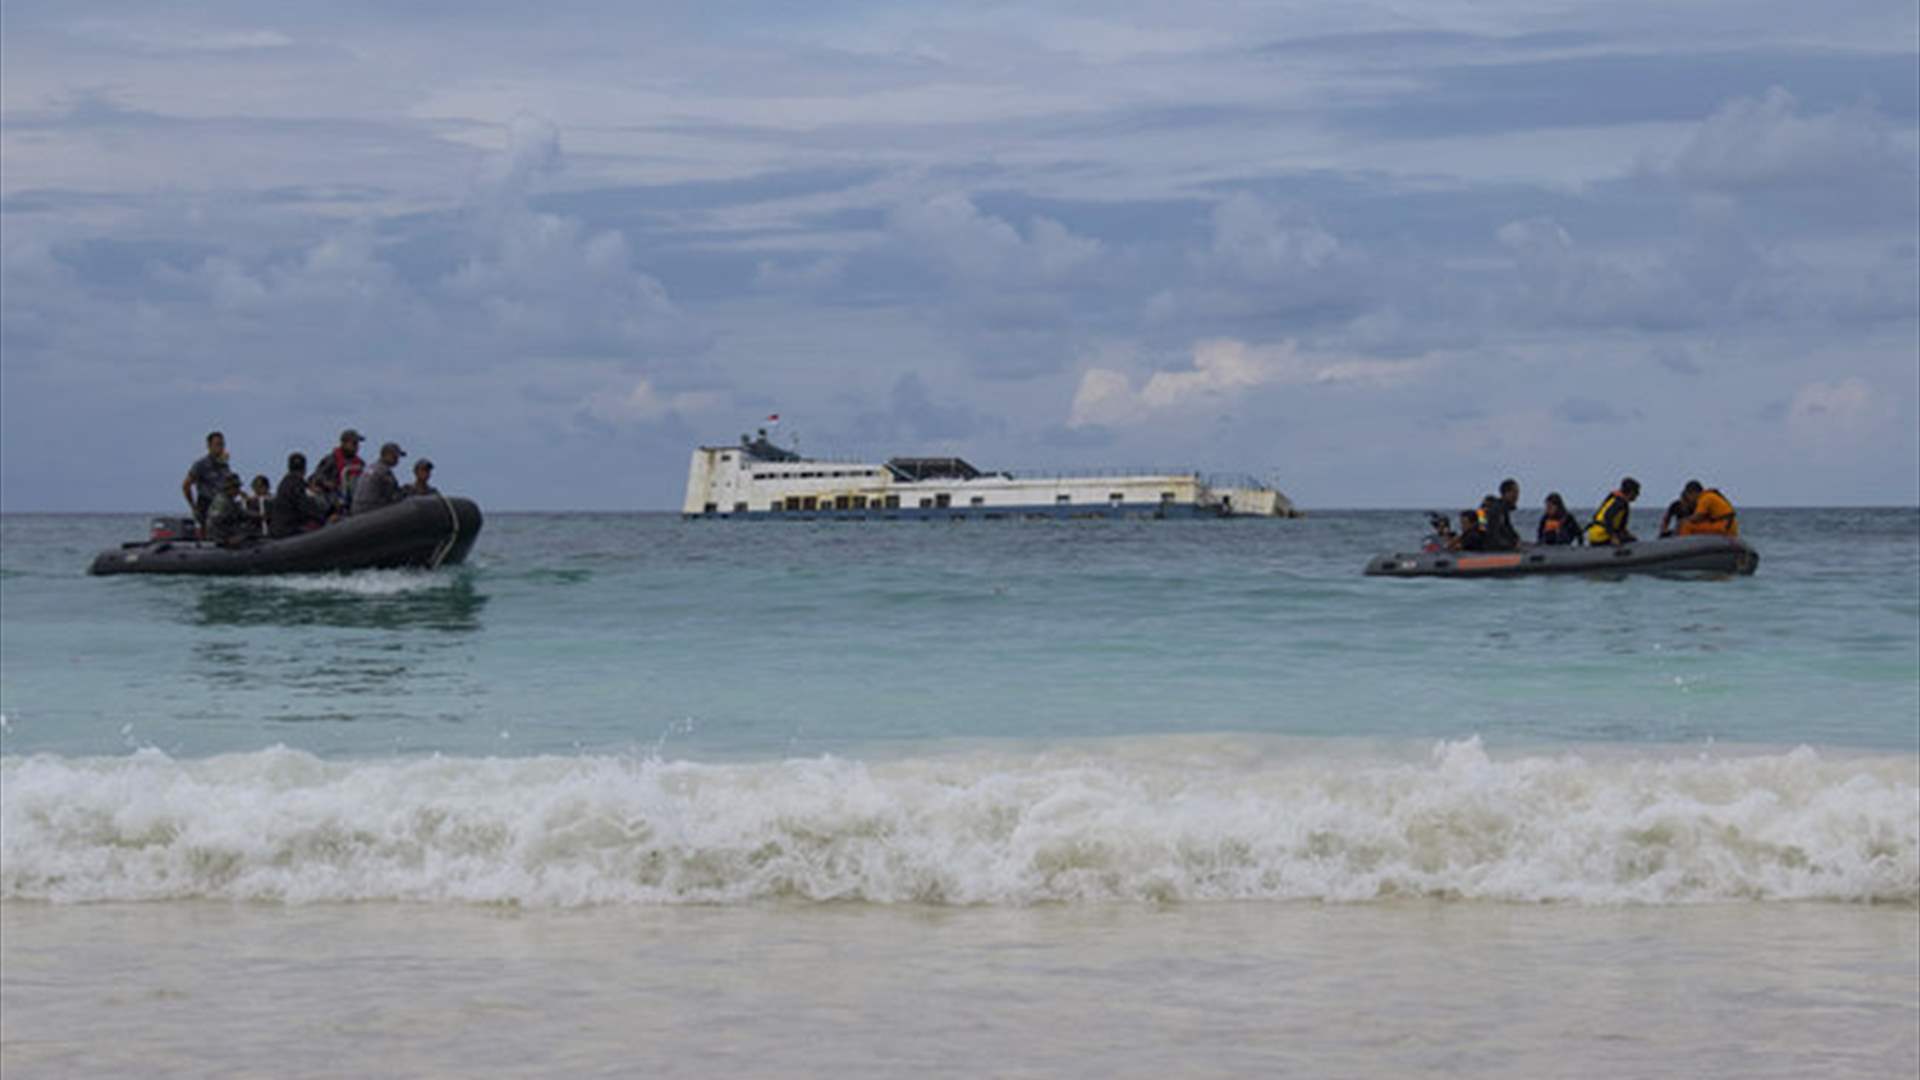 15 dead and 19 missing after boat sinks off the coast of Indonesia